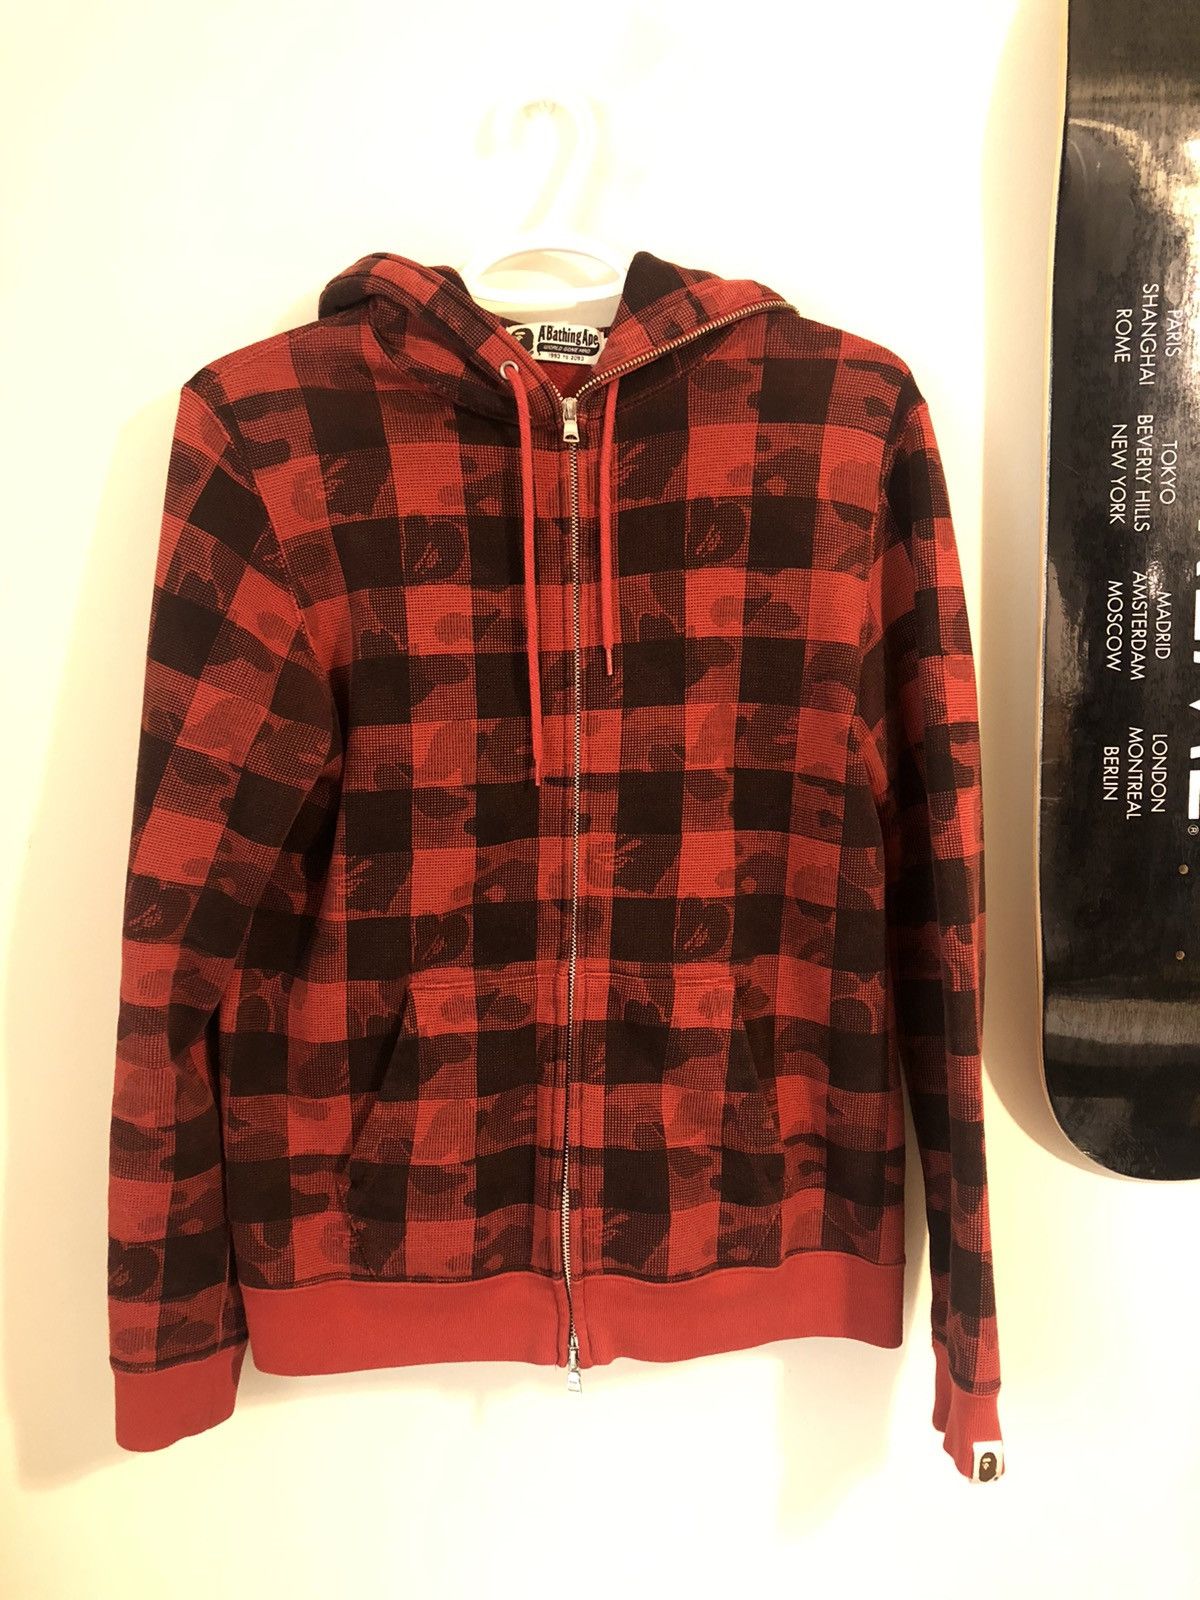 Bape Full Zip Up Hoodie Red Camo Size US S / EU 44-46 / 1 - 1 Preview